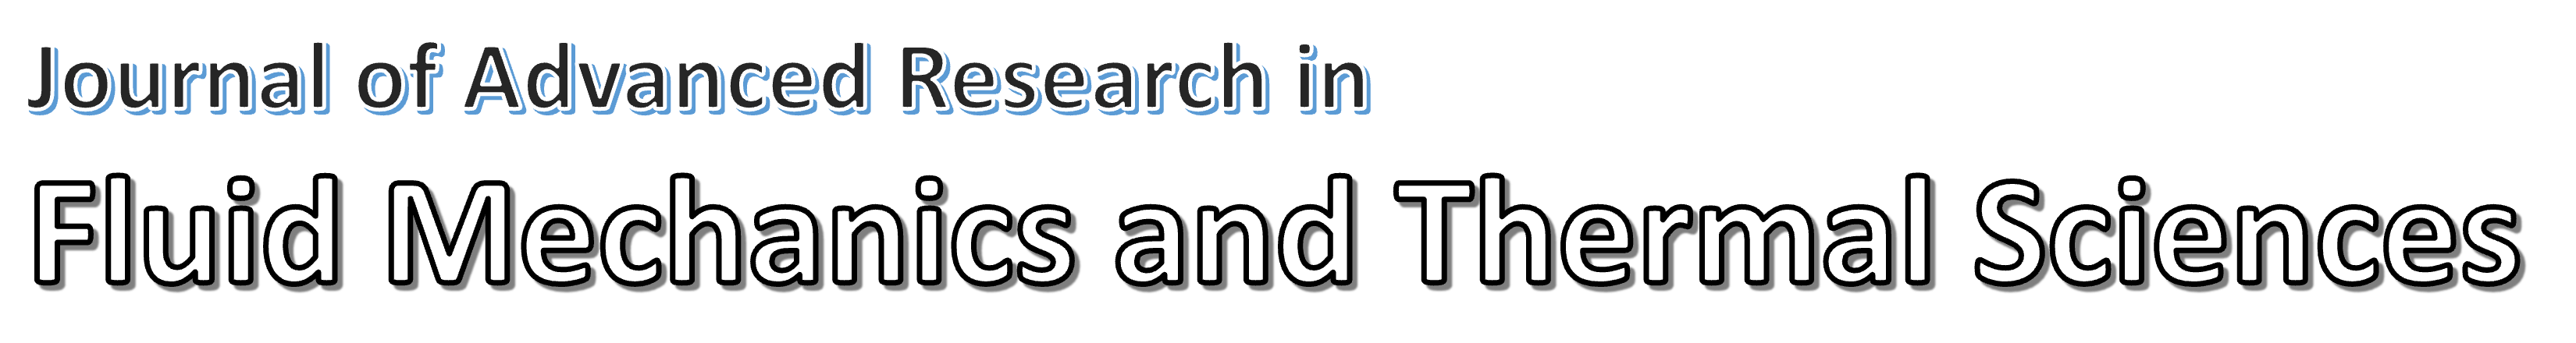 journal of advanced research in fluid mechanics and thermal sciences